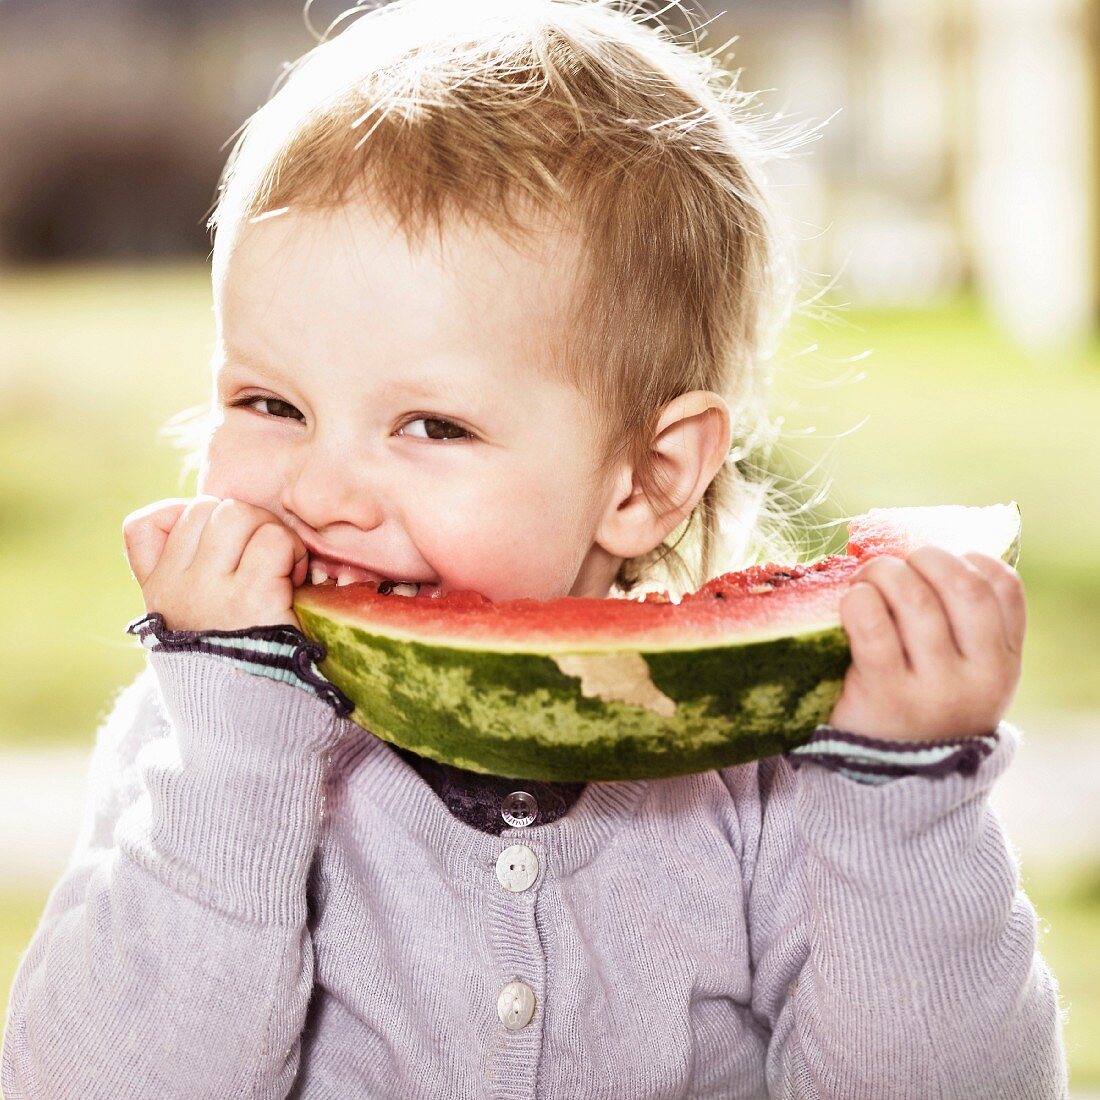 A little girl eating a slice of watermelon